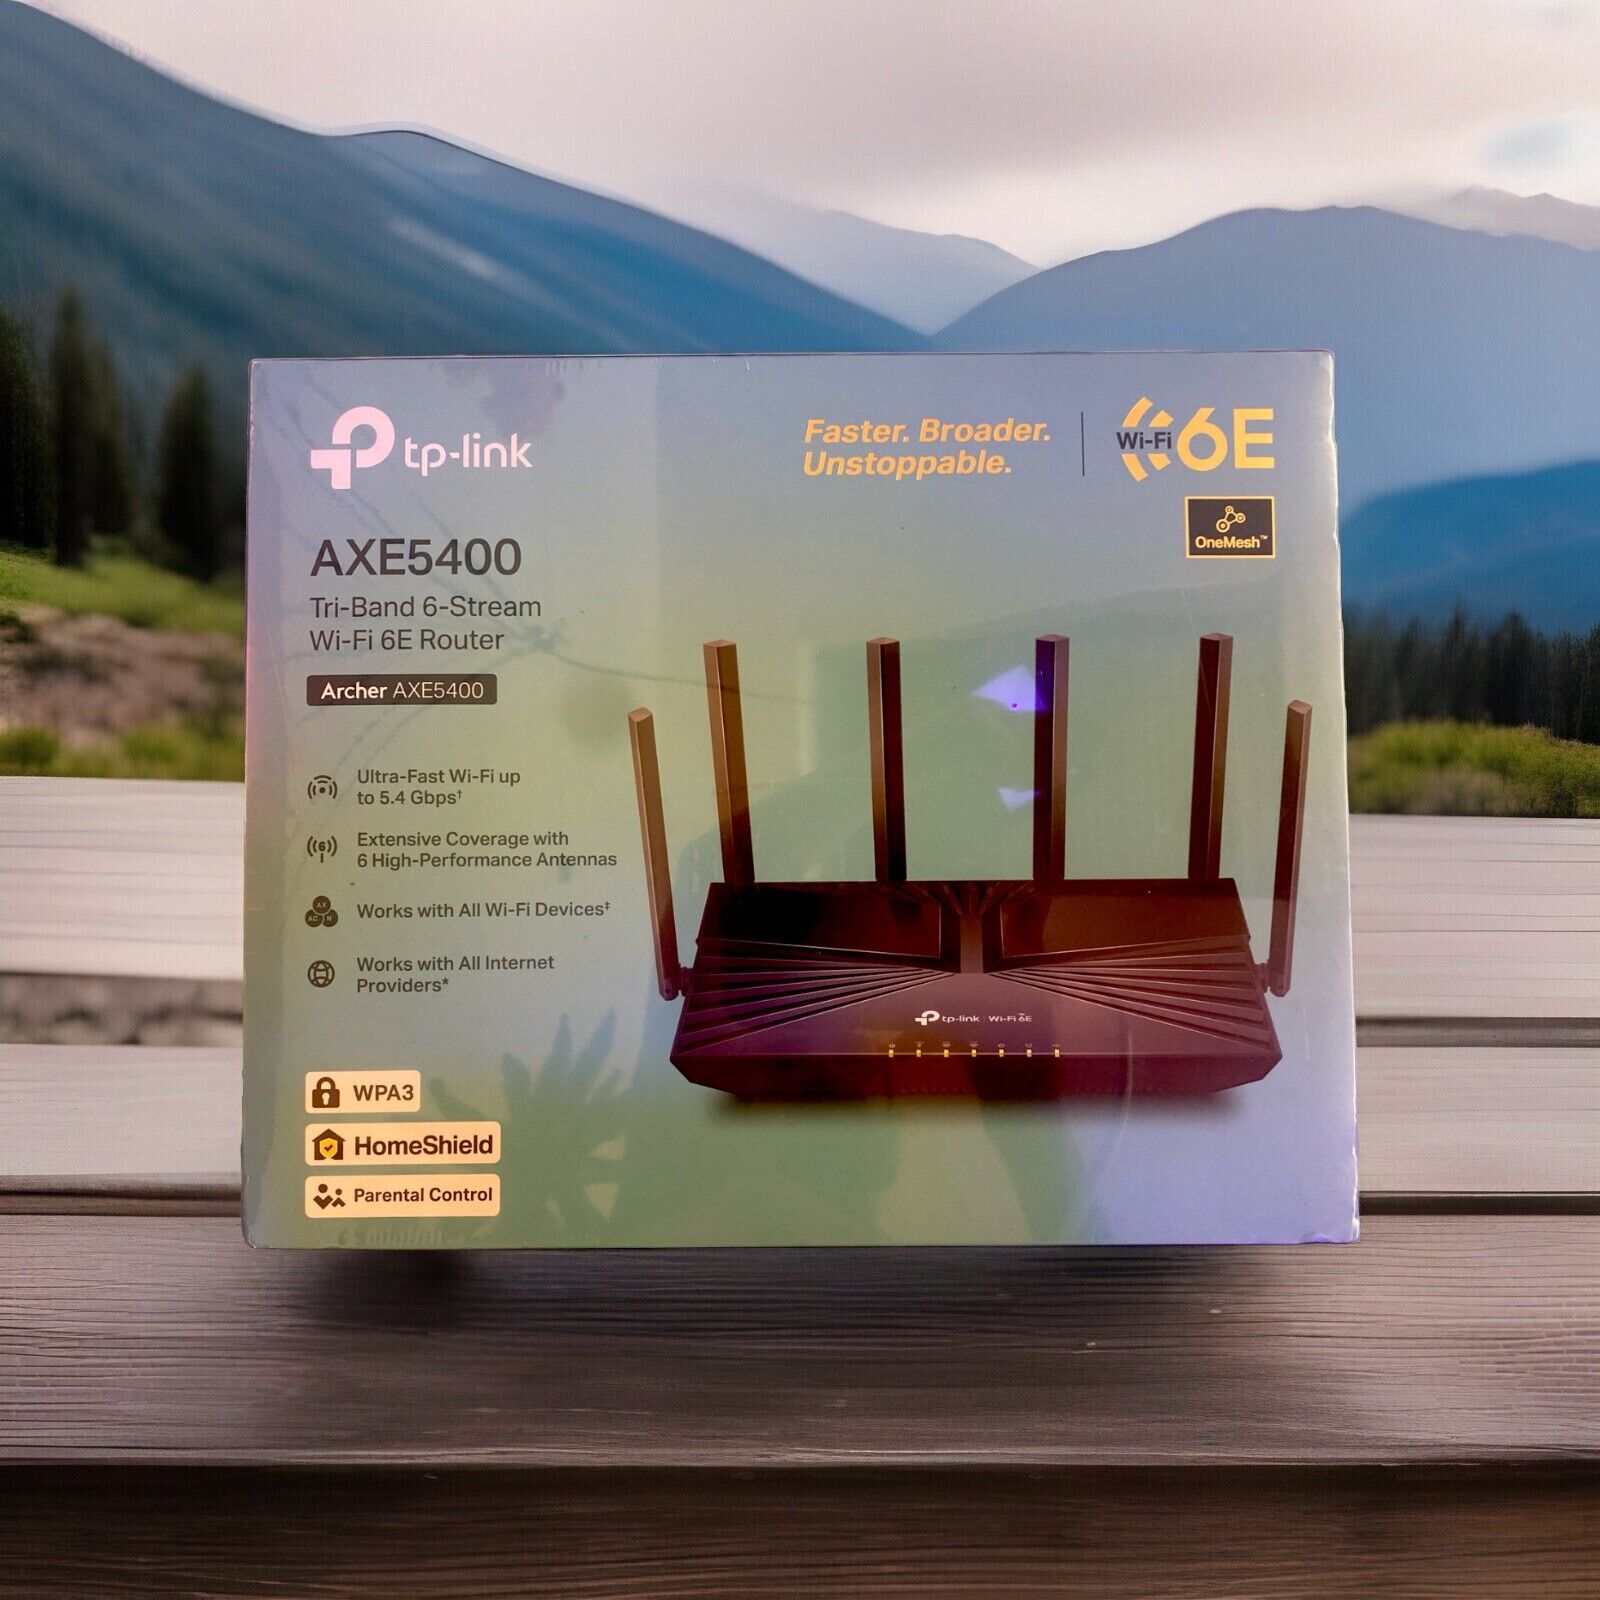 TP-Link Archer AXE5400 Tri-Band 6-Stream WiFi 6E Router *NEW & FACTORY SEALED*